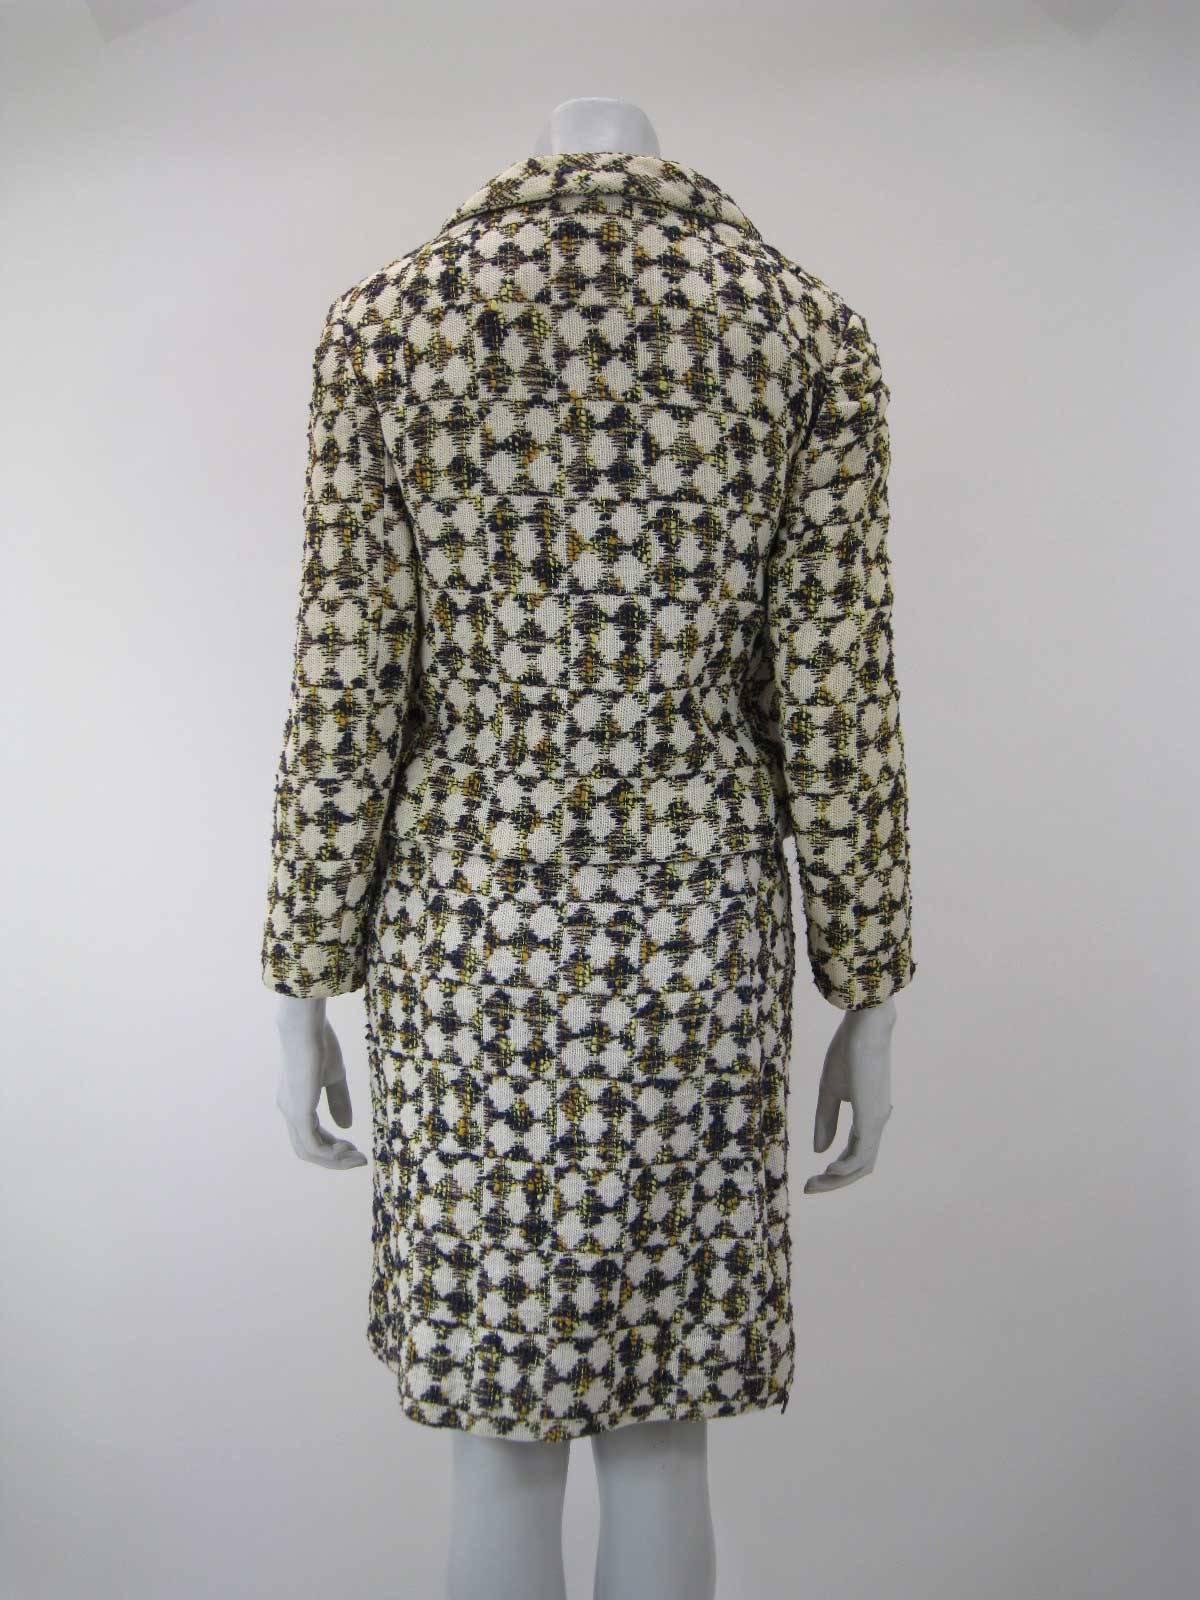 Women's Christian Dior 1960's Marc Bohan Numbered Houndstooth Suit